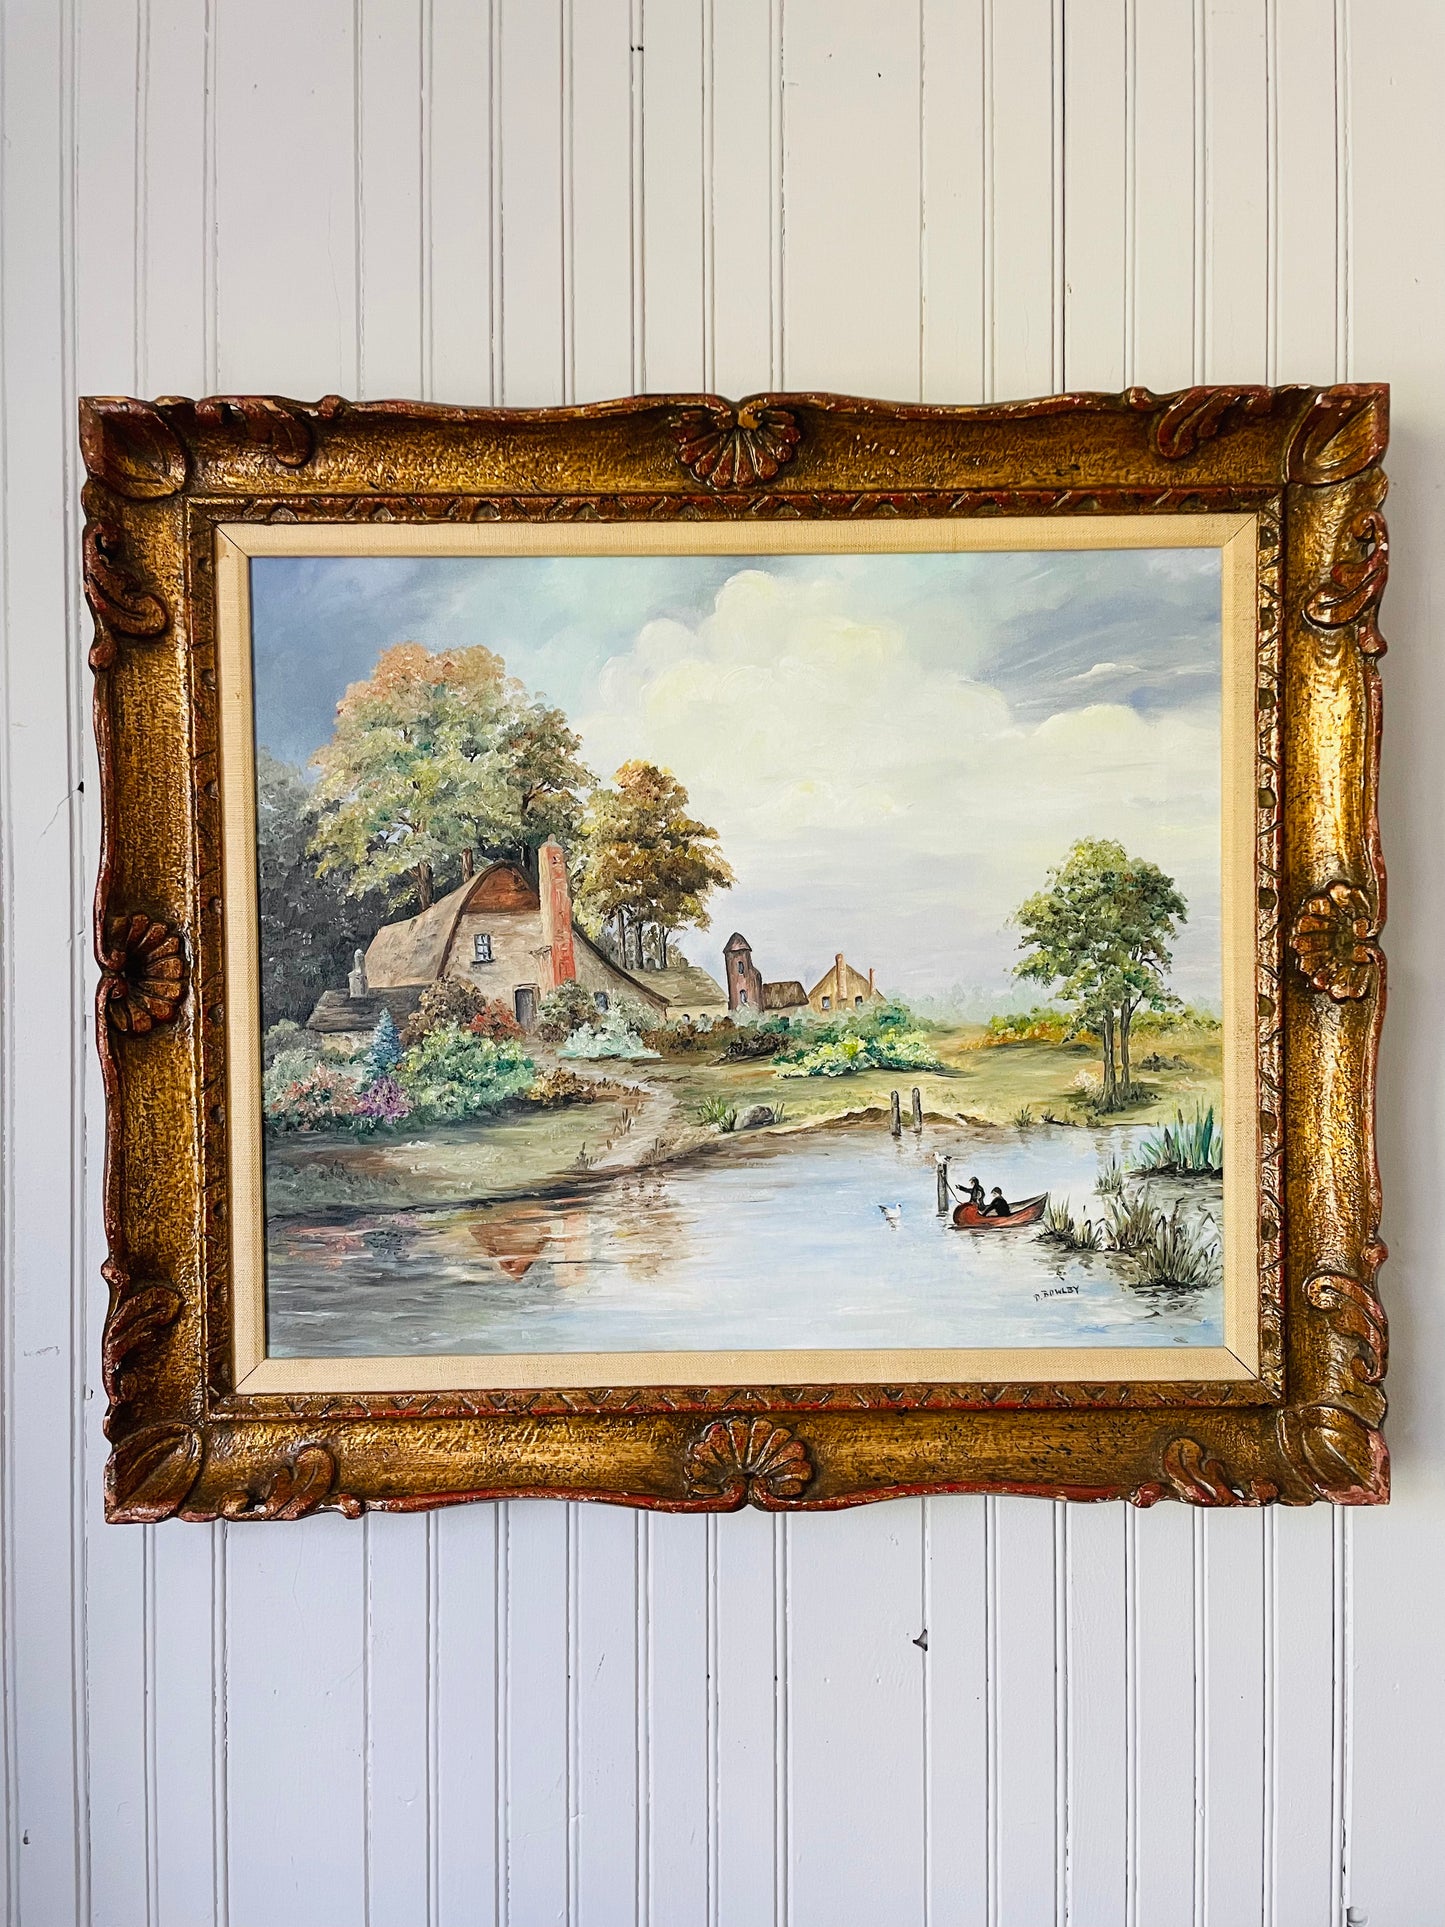 Original Art - Oil Painting of Cottage Scene in Ornate Frame - Signed by Artist D. Bowlby Circa 1930